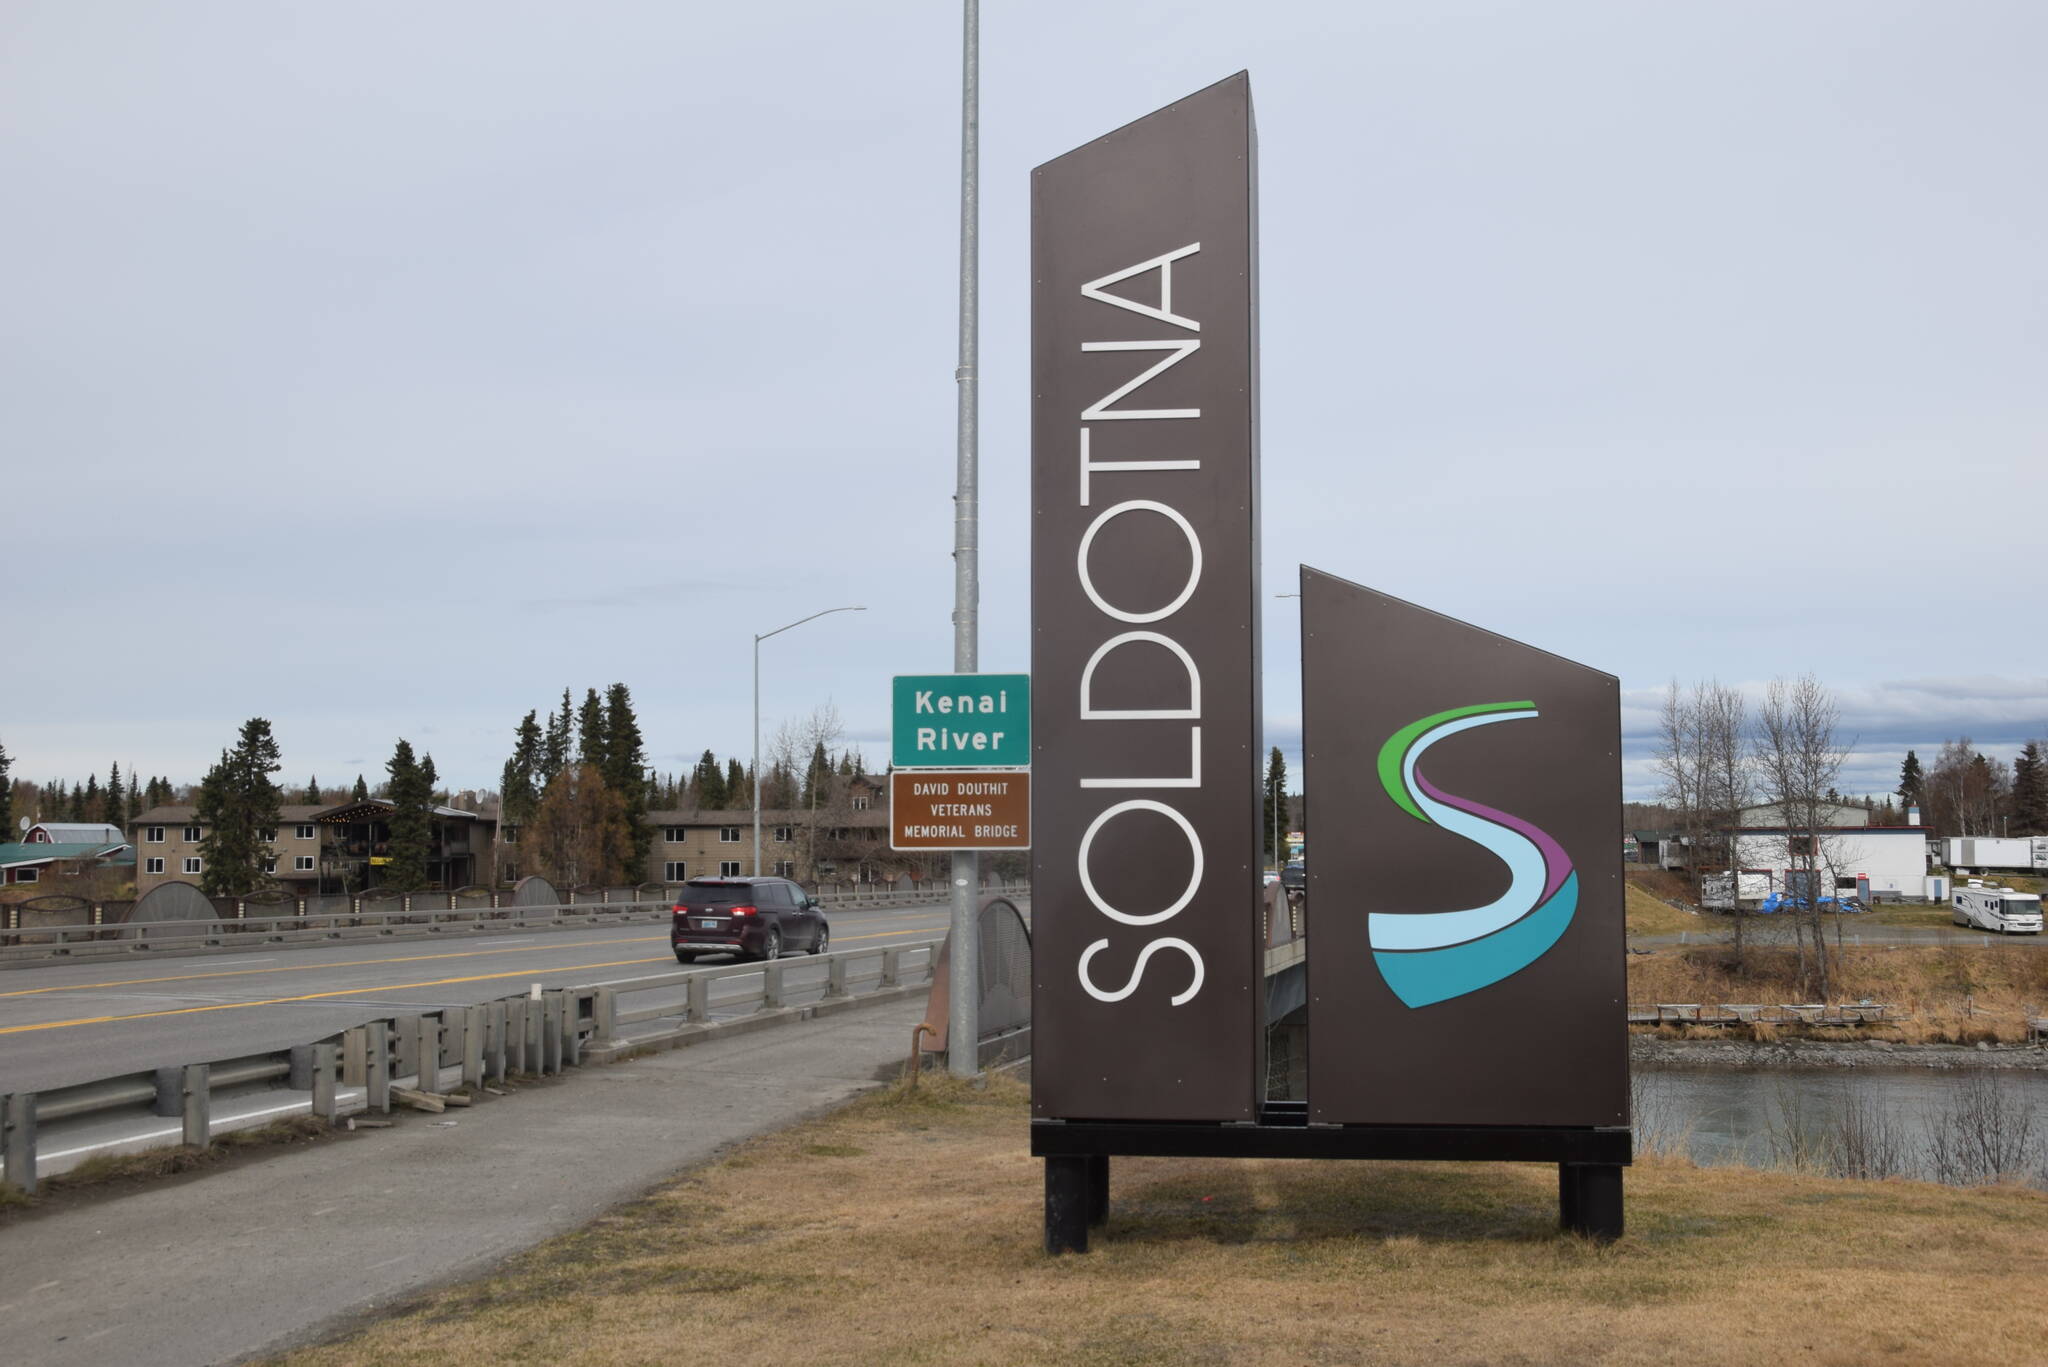 A sign welcoming people to the City of Soldotna is photographed on May 1, 2019, in Soldotna, Alaska. (Photo by Brian Mazurek/Peninsula Clarion)